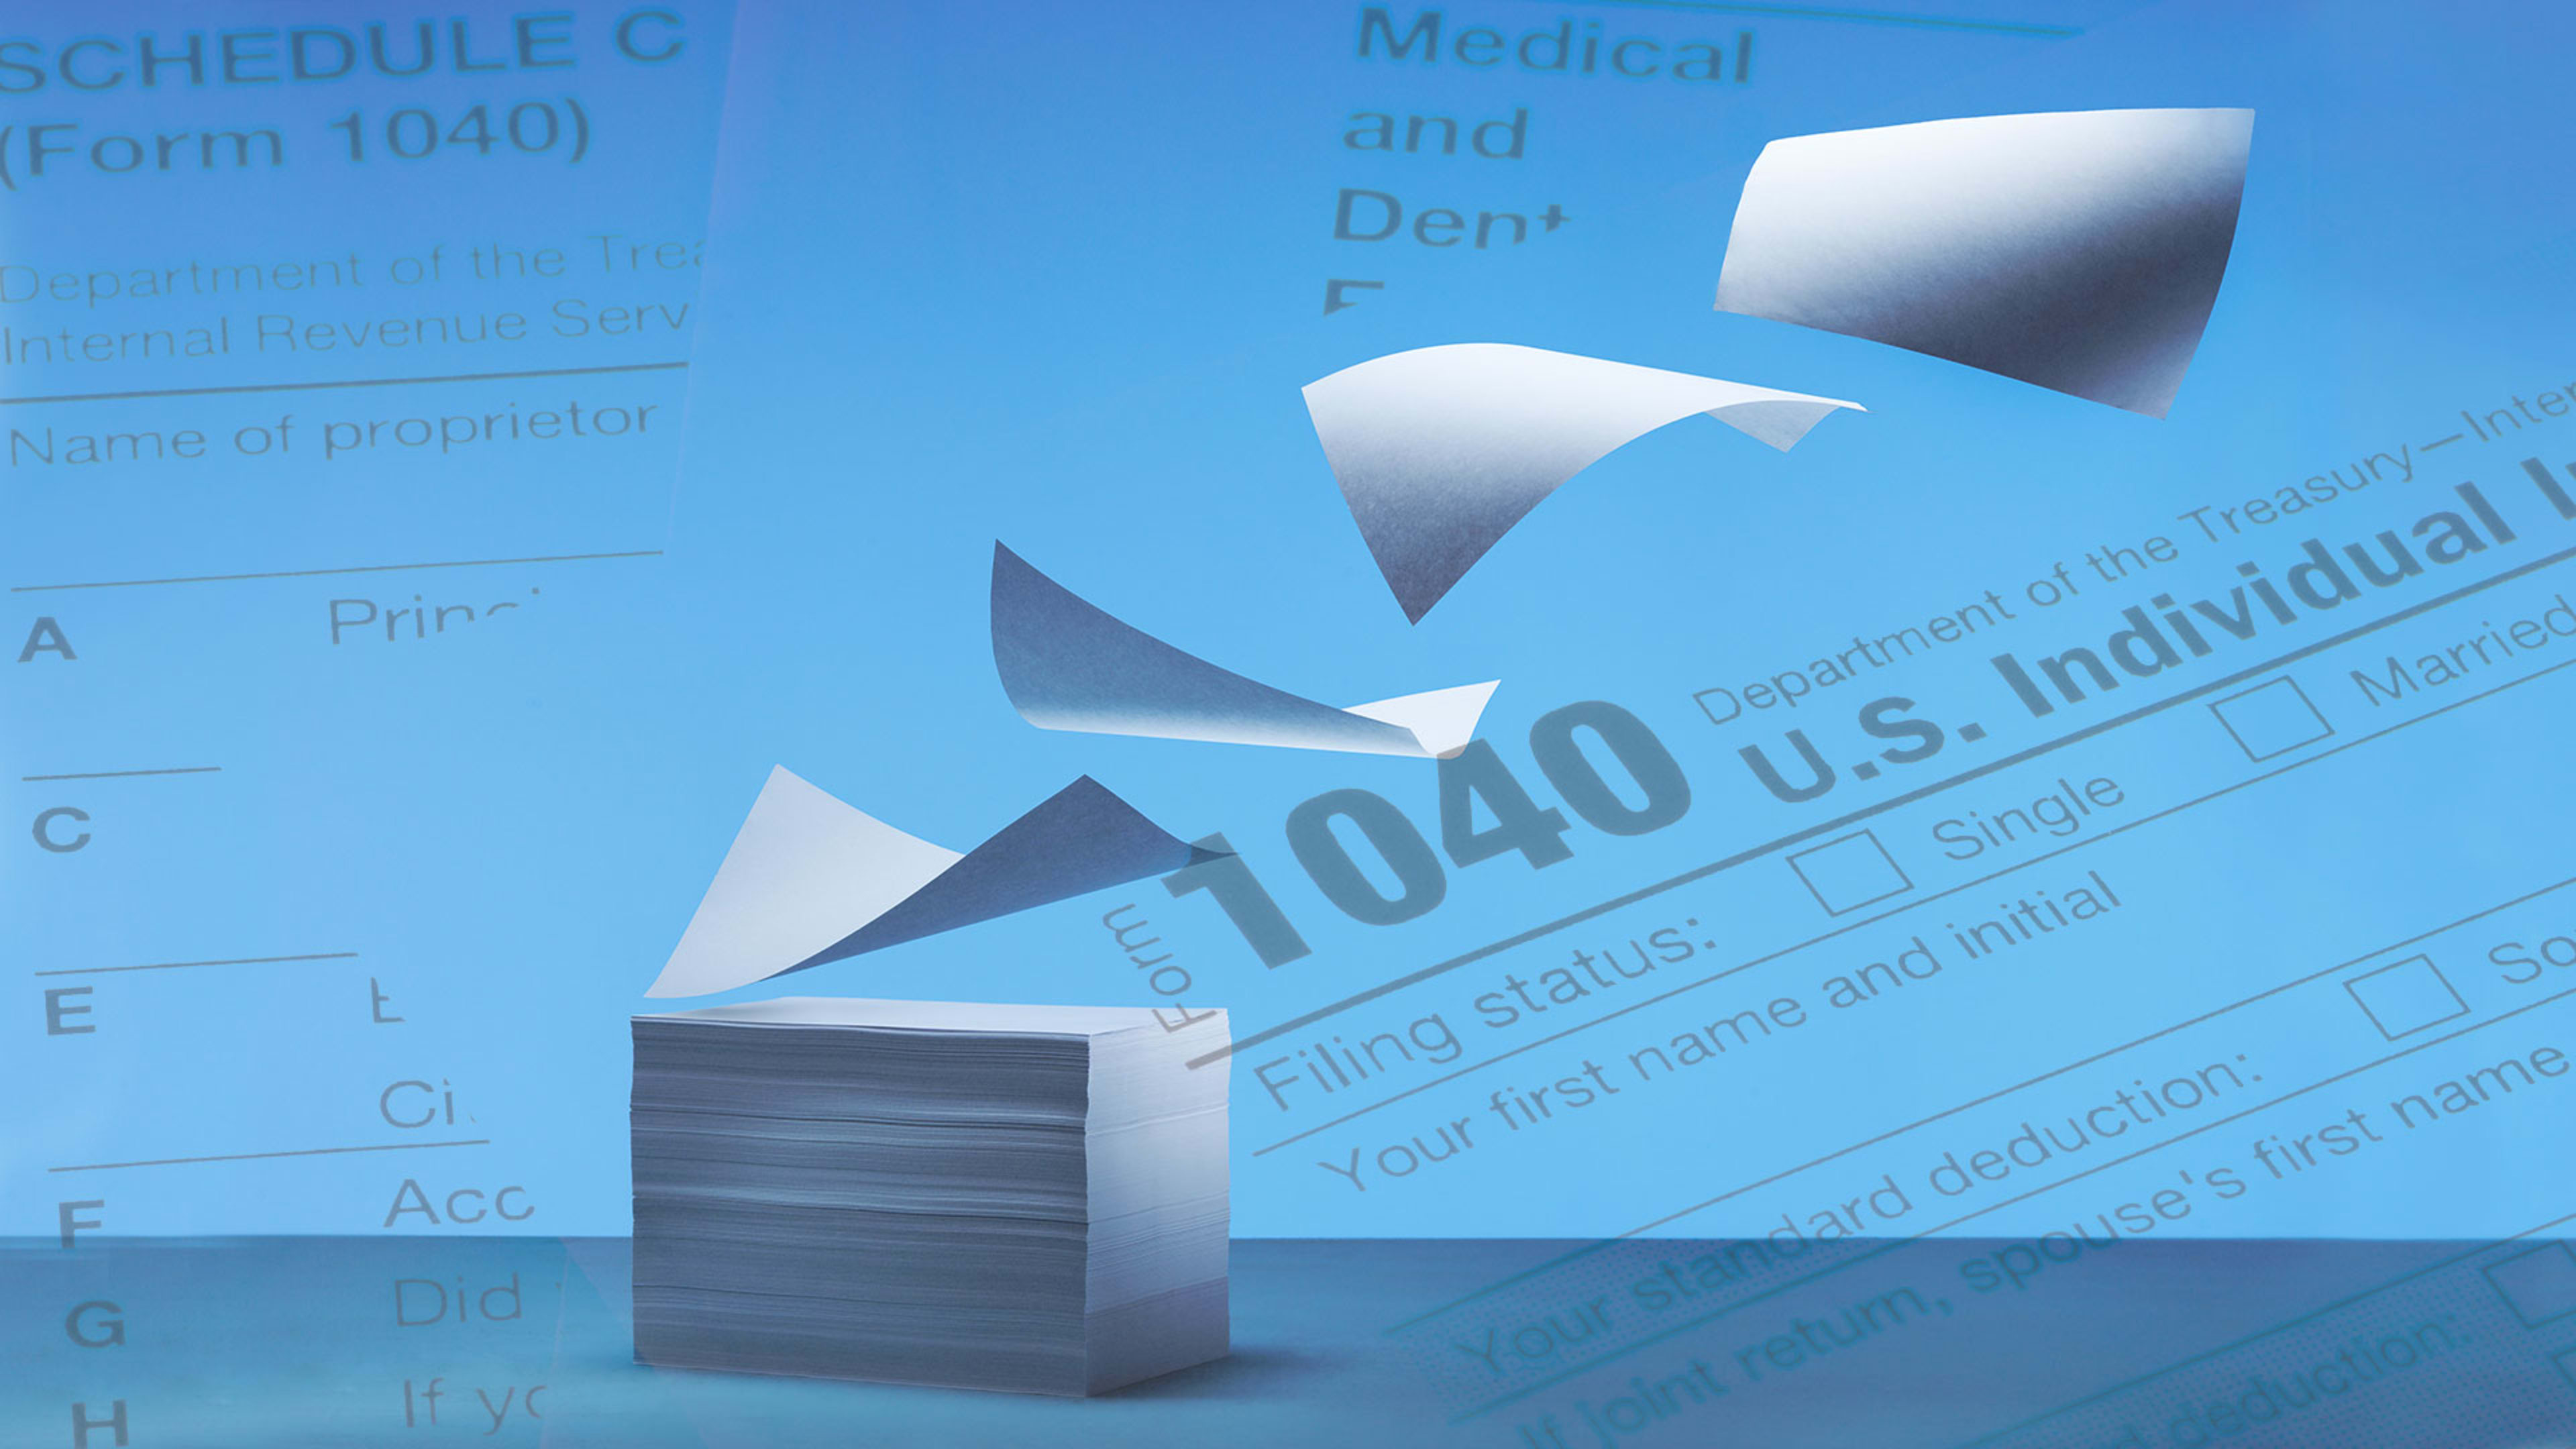 IRS rejects plan to speed up processing, despite massive paper backlog and delayed tax refunds